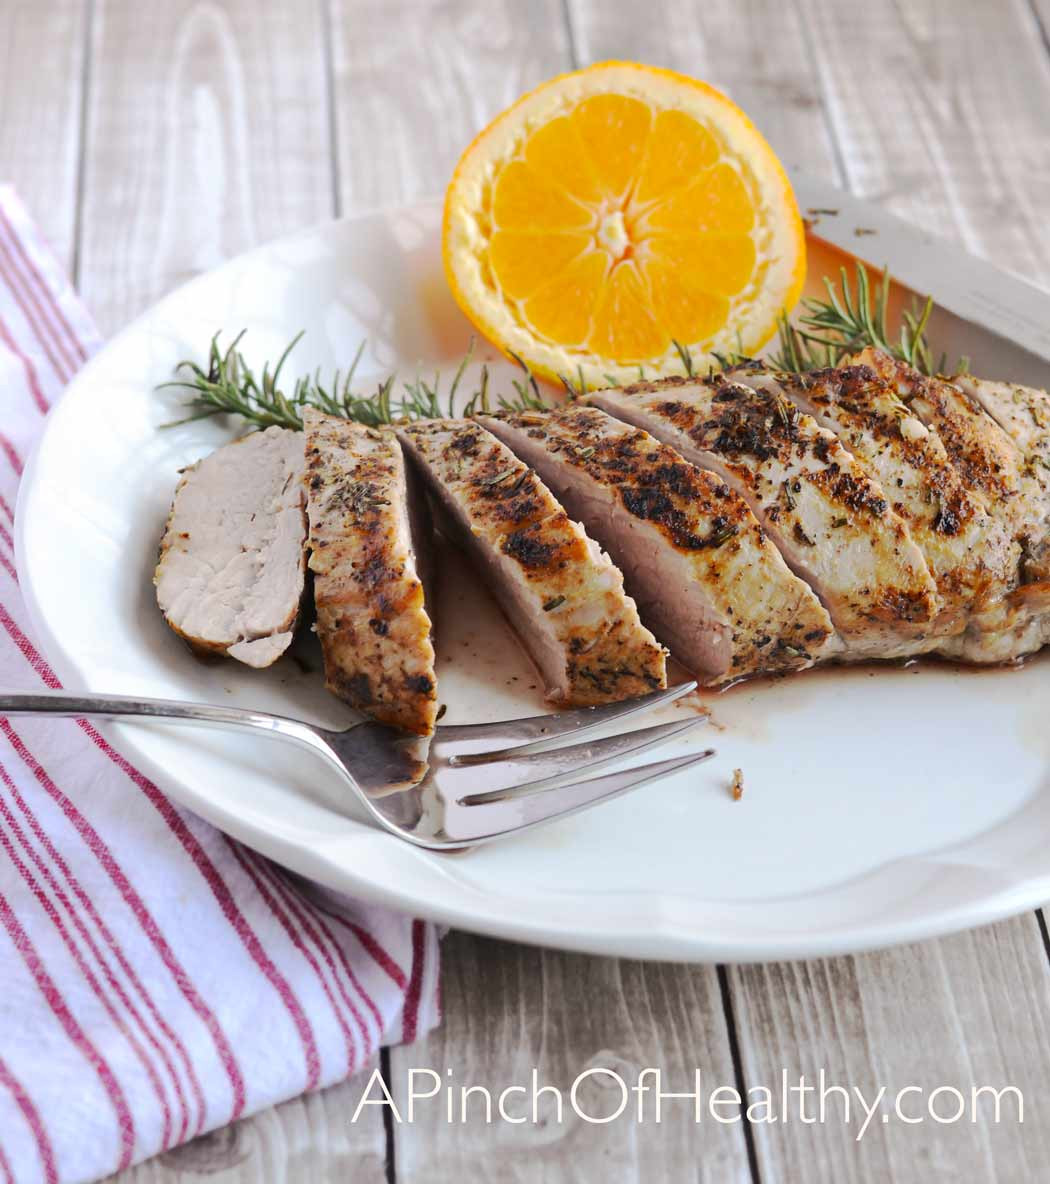 How To Grill Pork Tenderloin
 Grilled Pork Tenderloin on the Stovetop A Pinch of Healthy